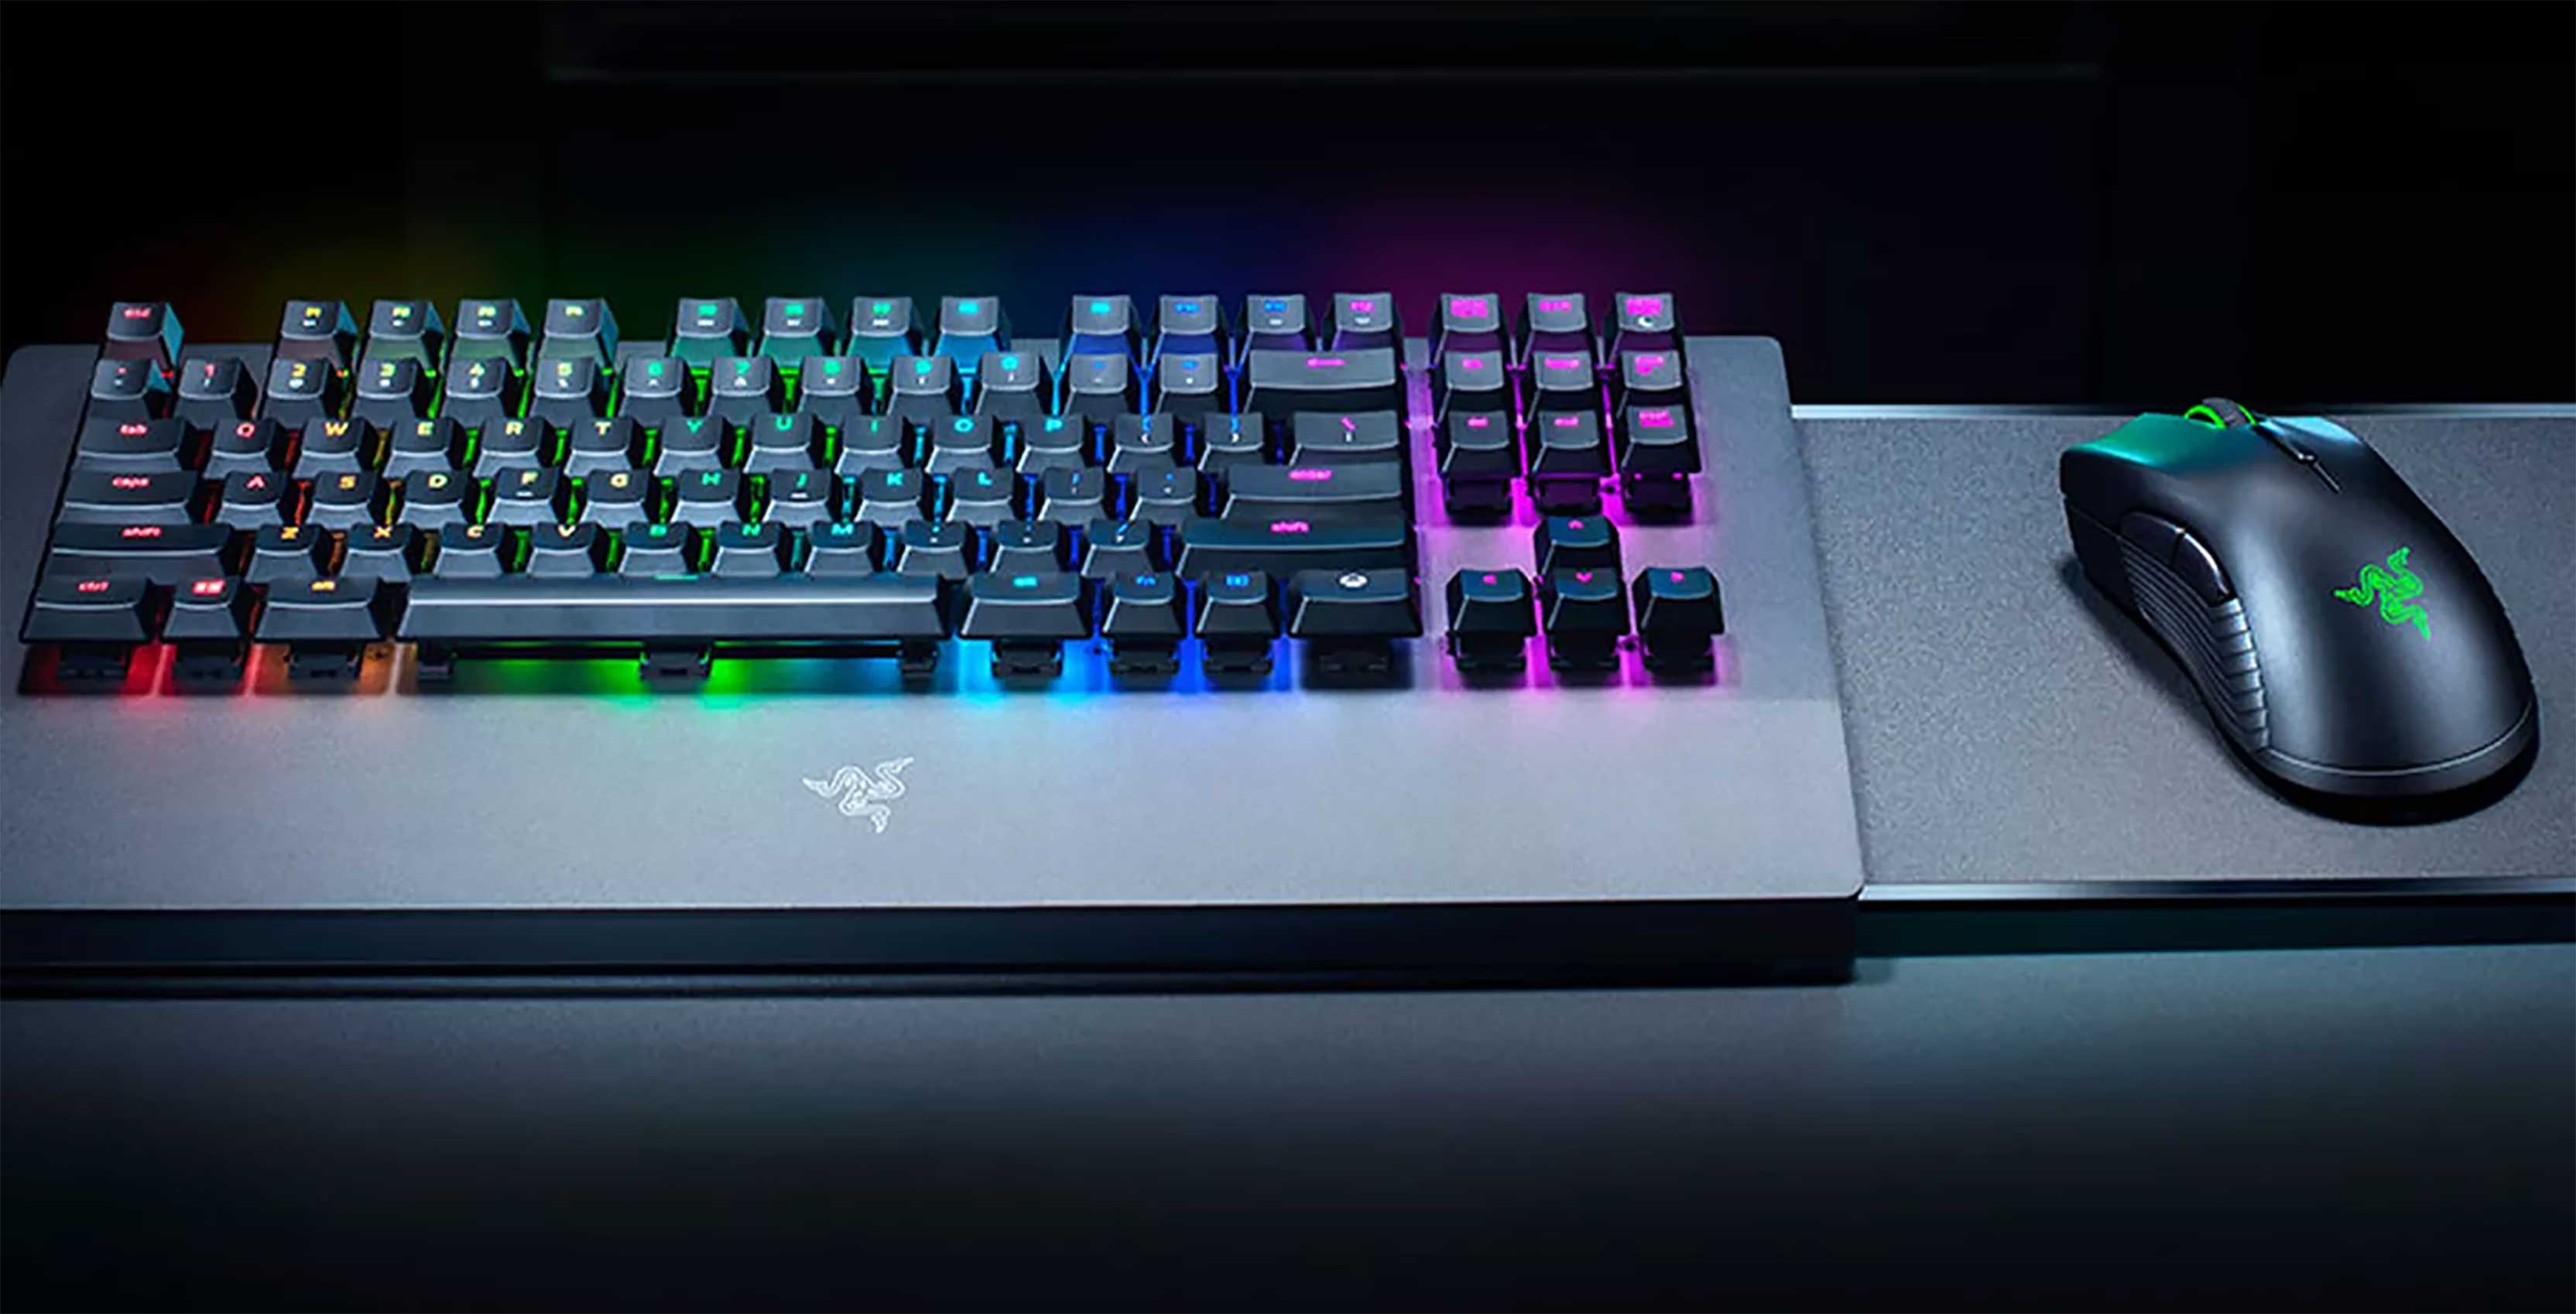 Razer Xbox One mouse and keyboard